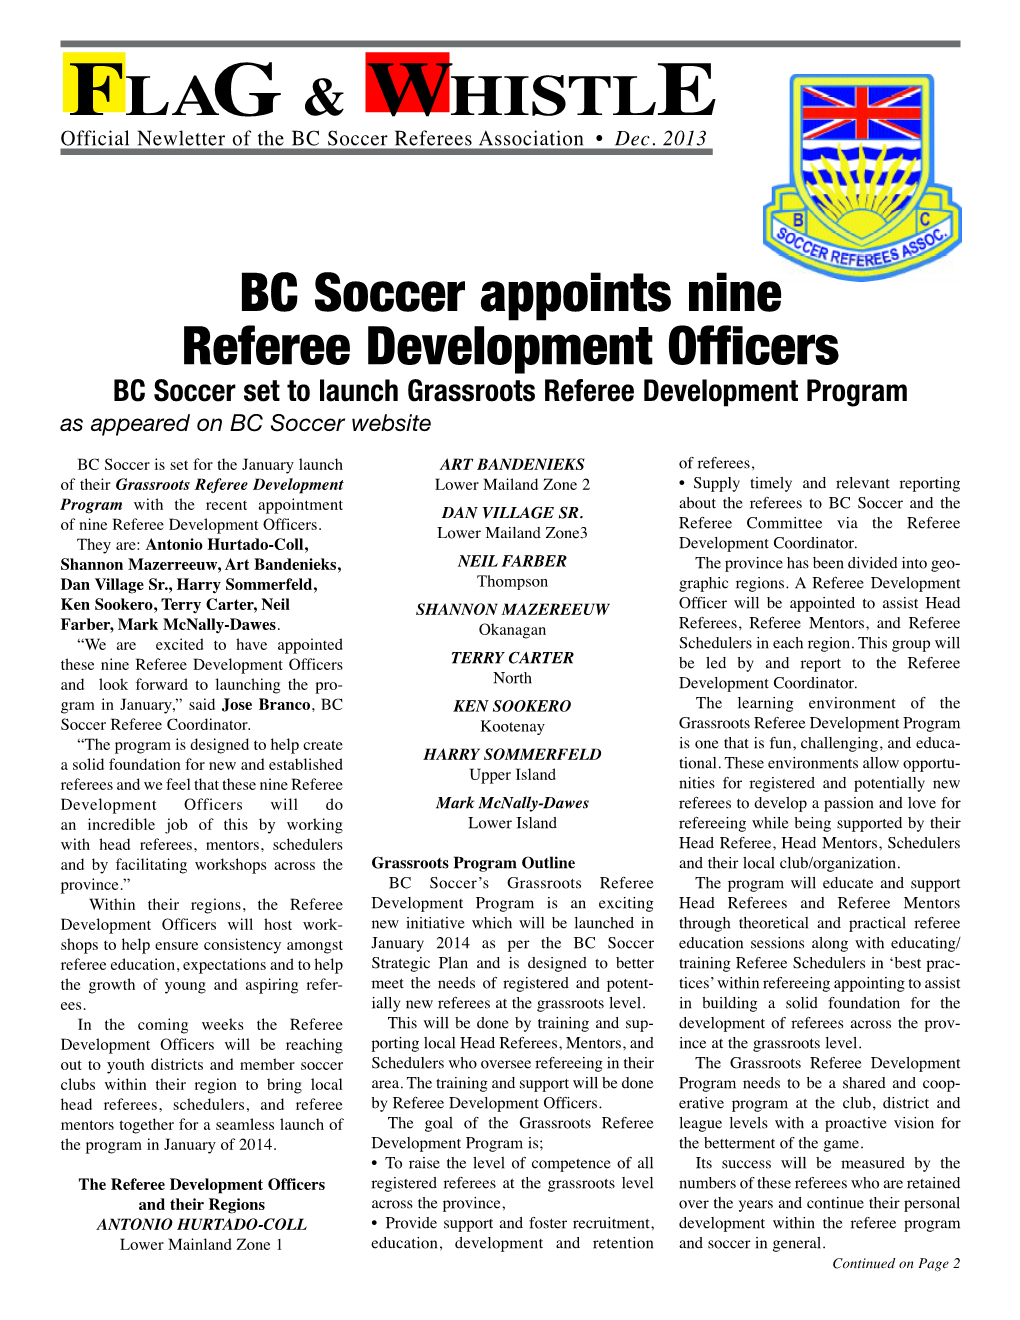 FLAG & WHISTLE BC Soccer Appoints Nine Referee Development Officers